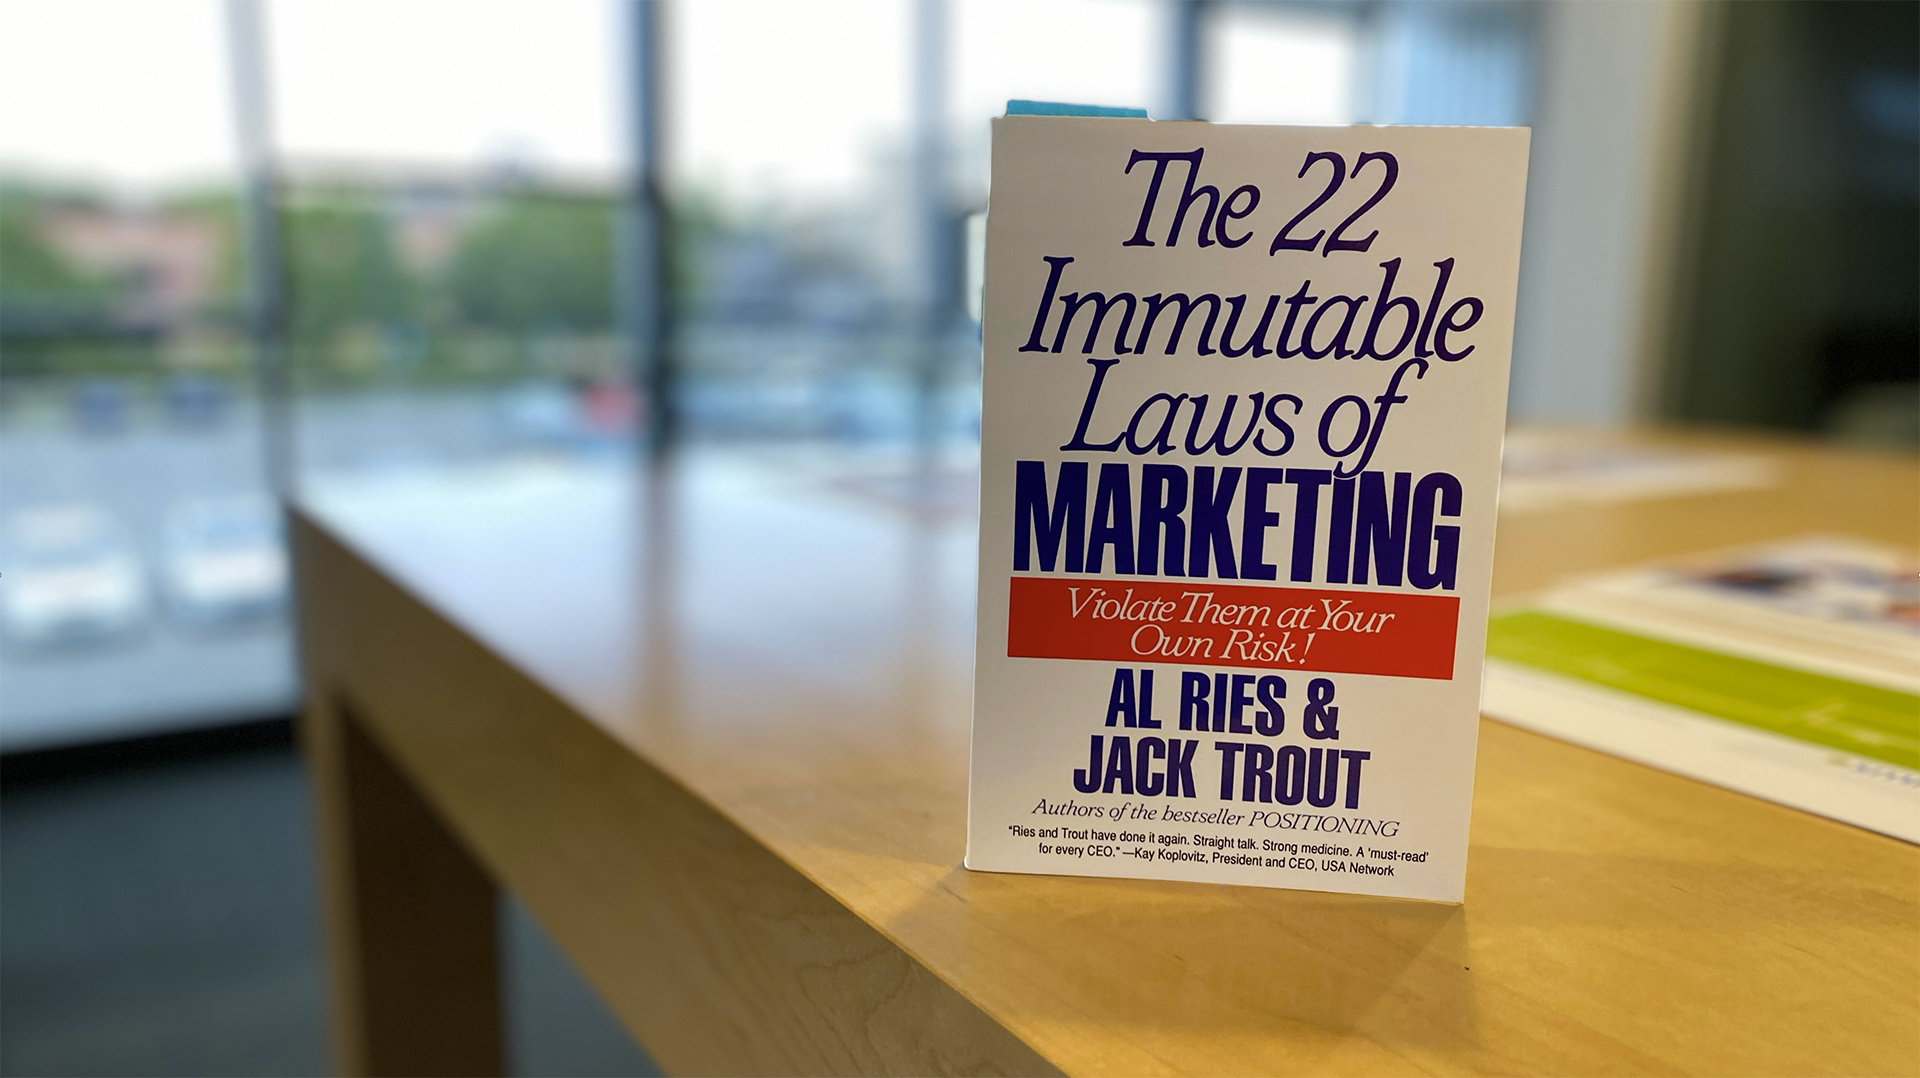 Book Report: The 22 Immutable Laws of Marketing